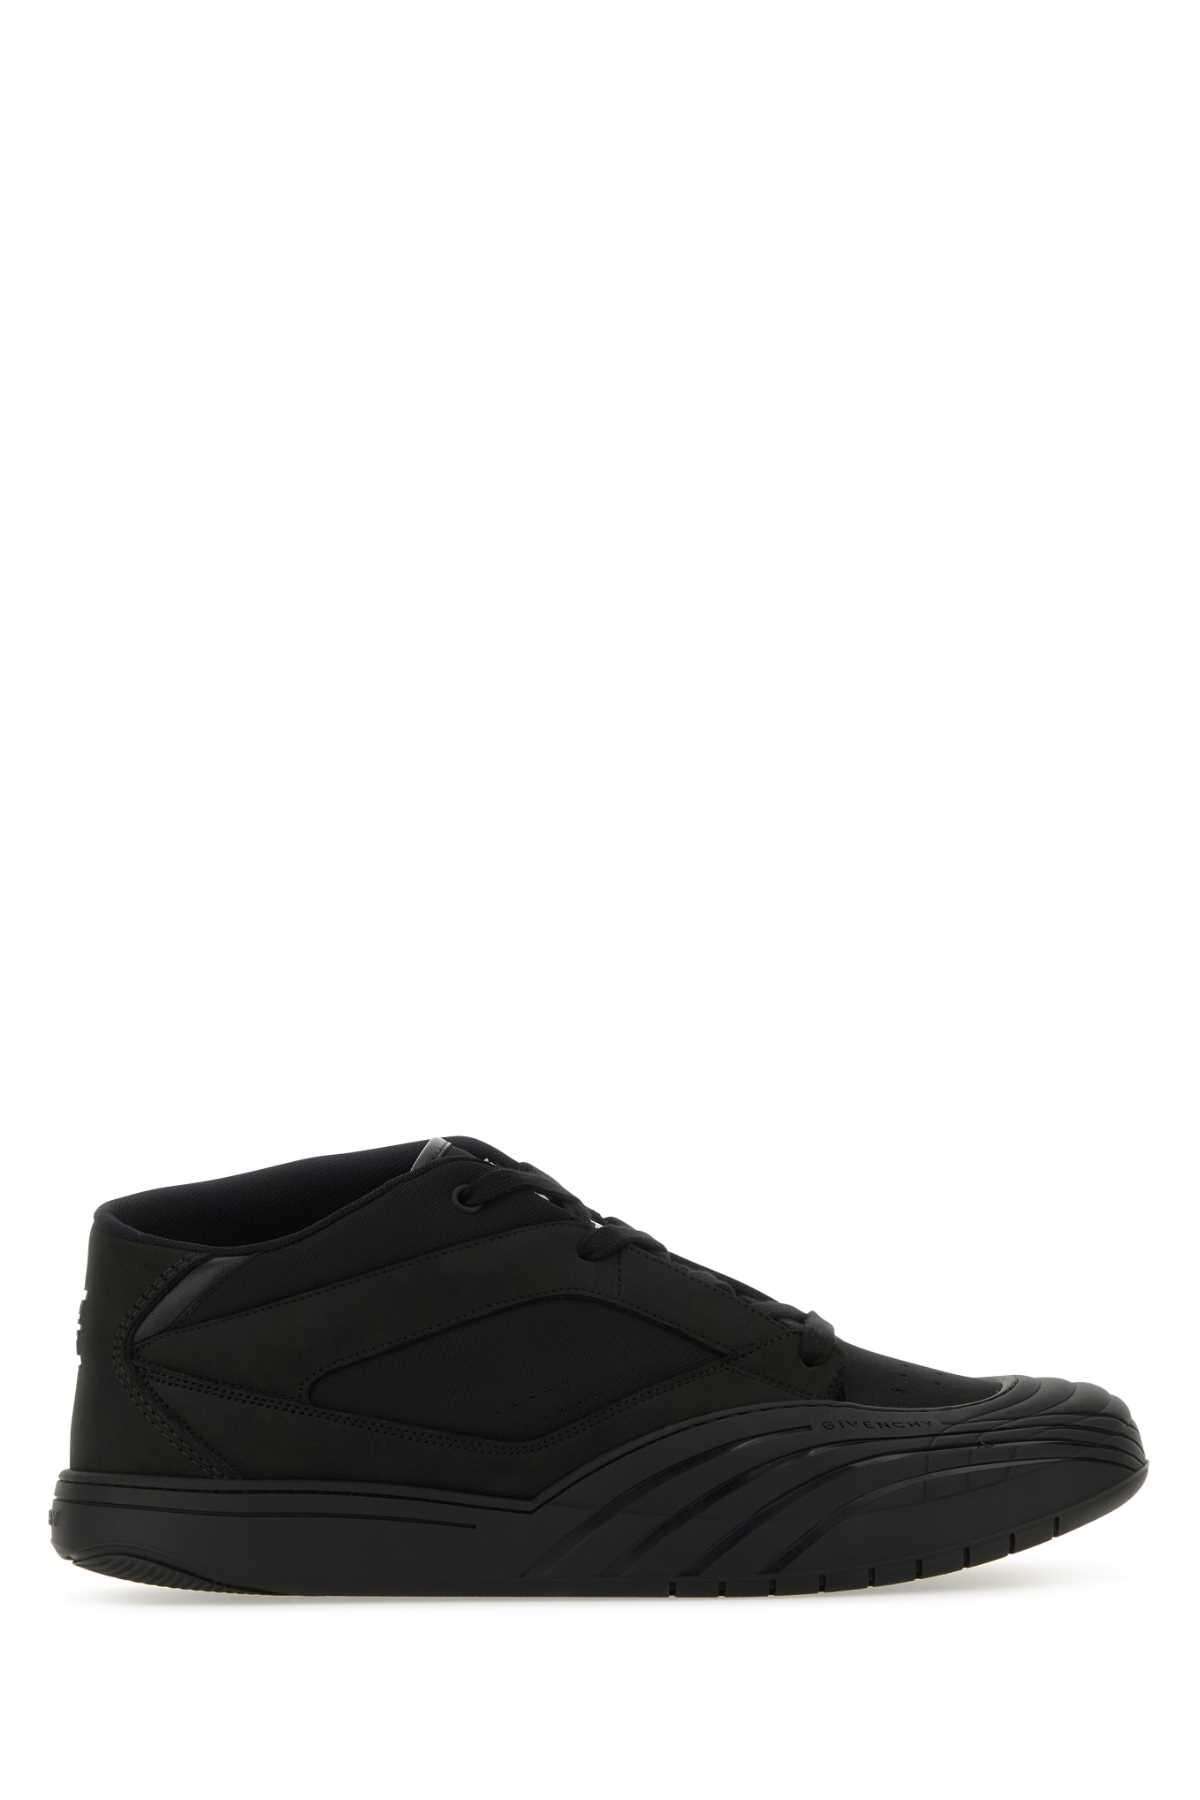 Givenchy Black Fabric And Leather Skate Sneakers